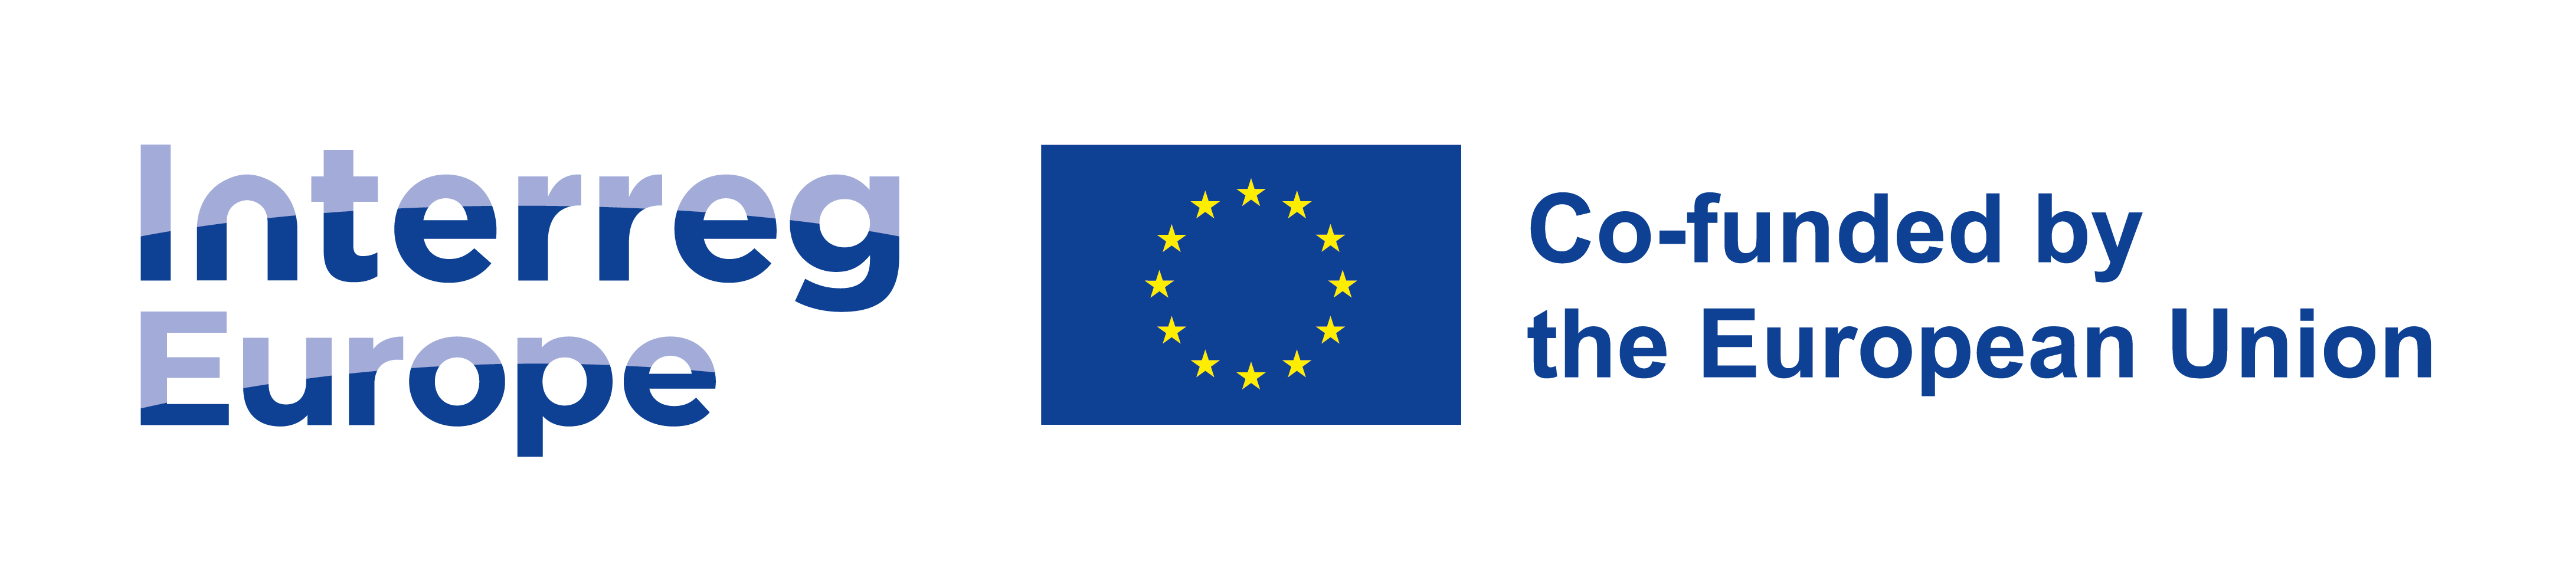 Interreg Europe Co-funded by the European Union